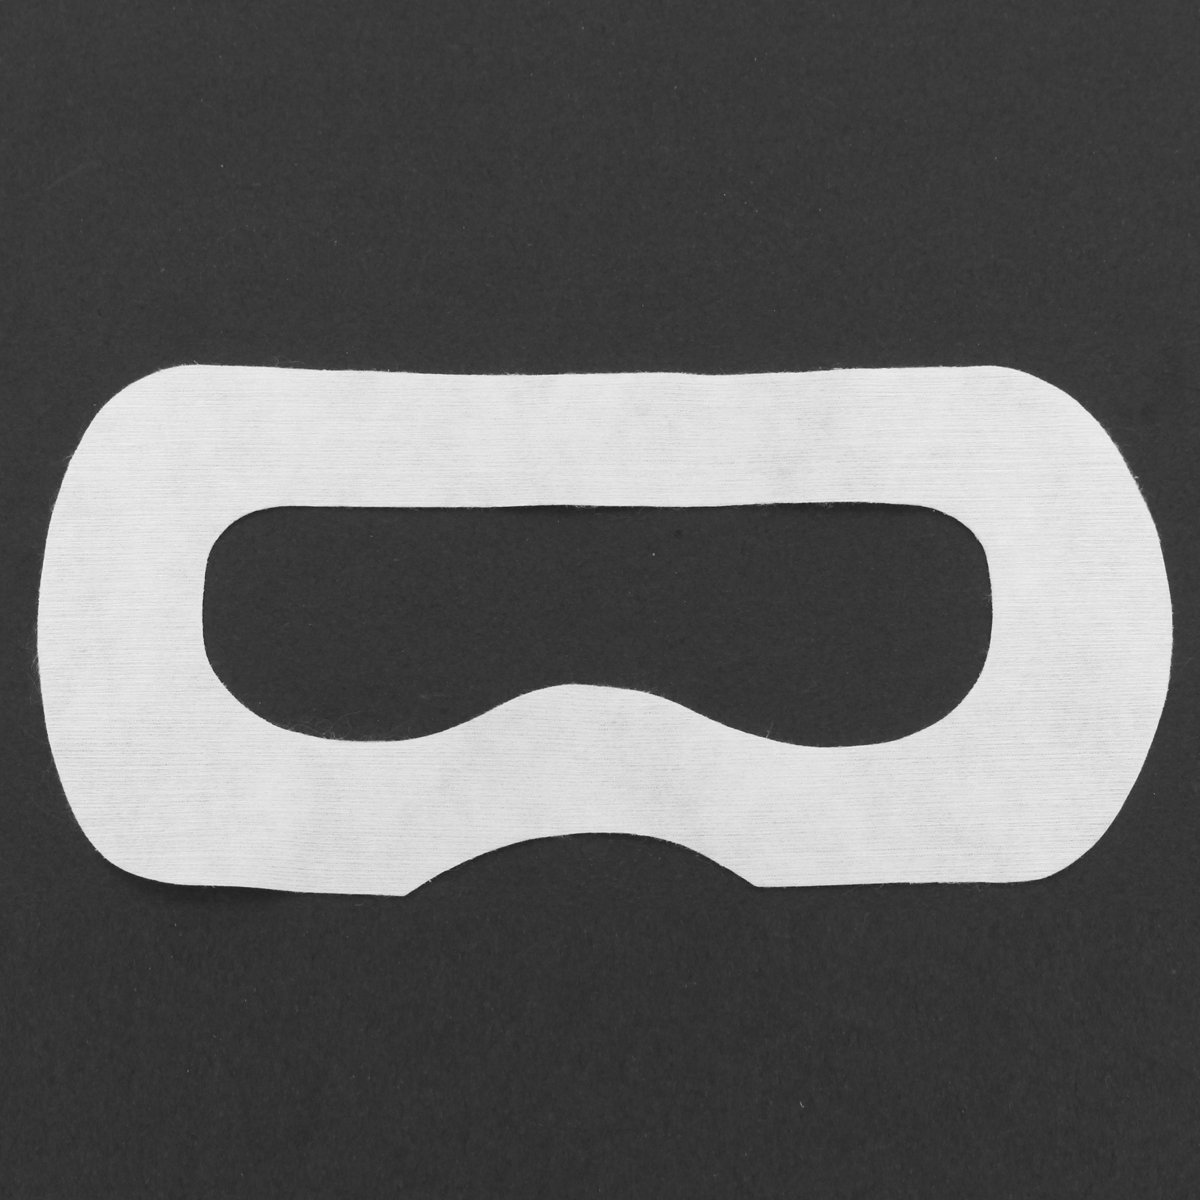 20-Pieces-Disposable-Hygiene-Eye-Face-Mask-Patch-Face-Covers-For-HTC-Vive-VR-1202190